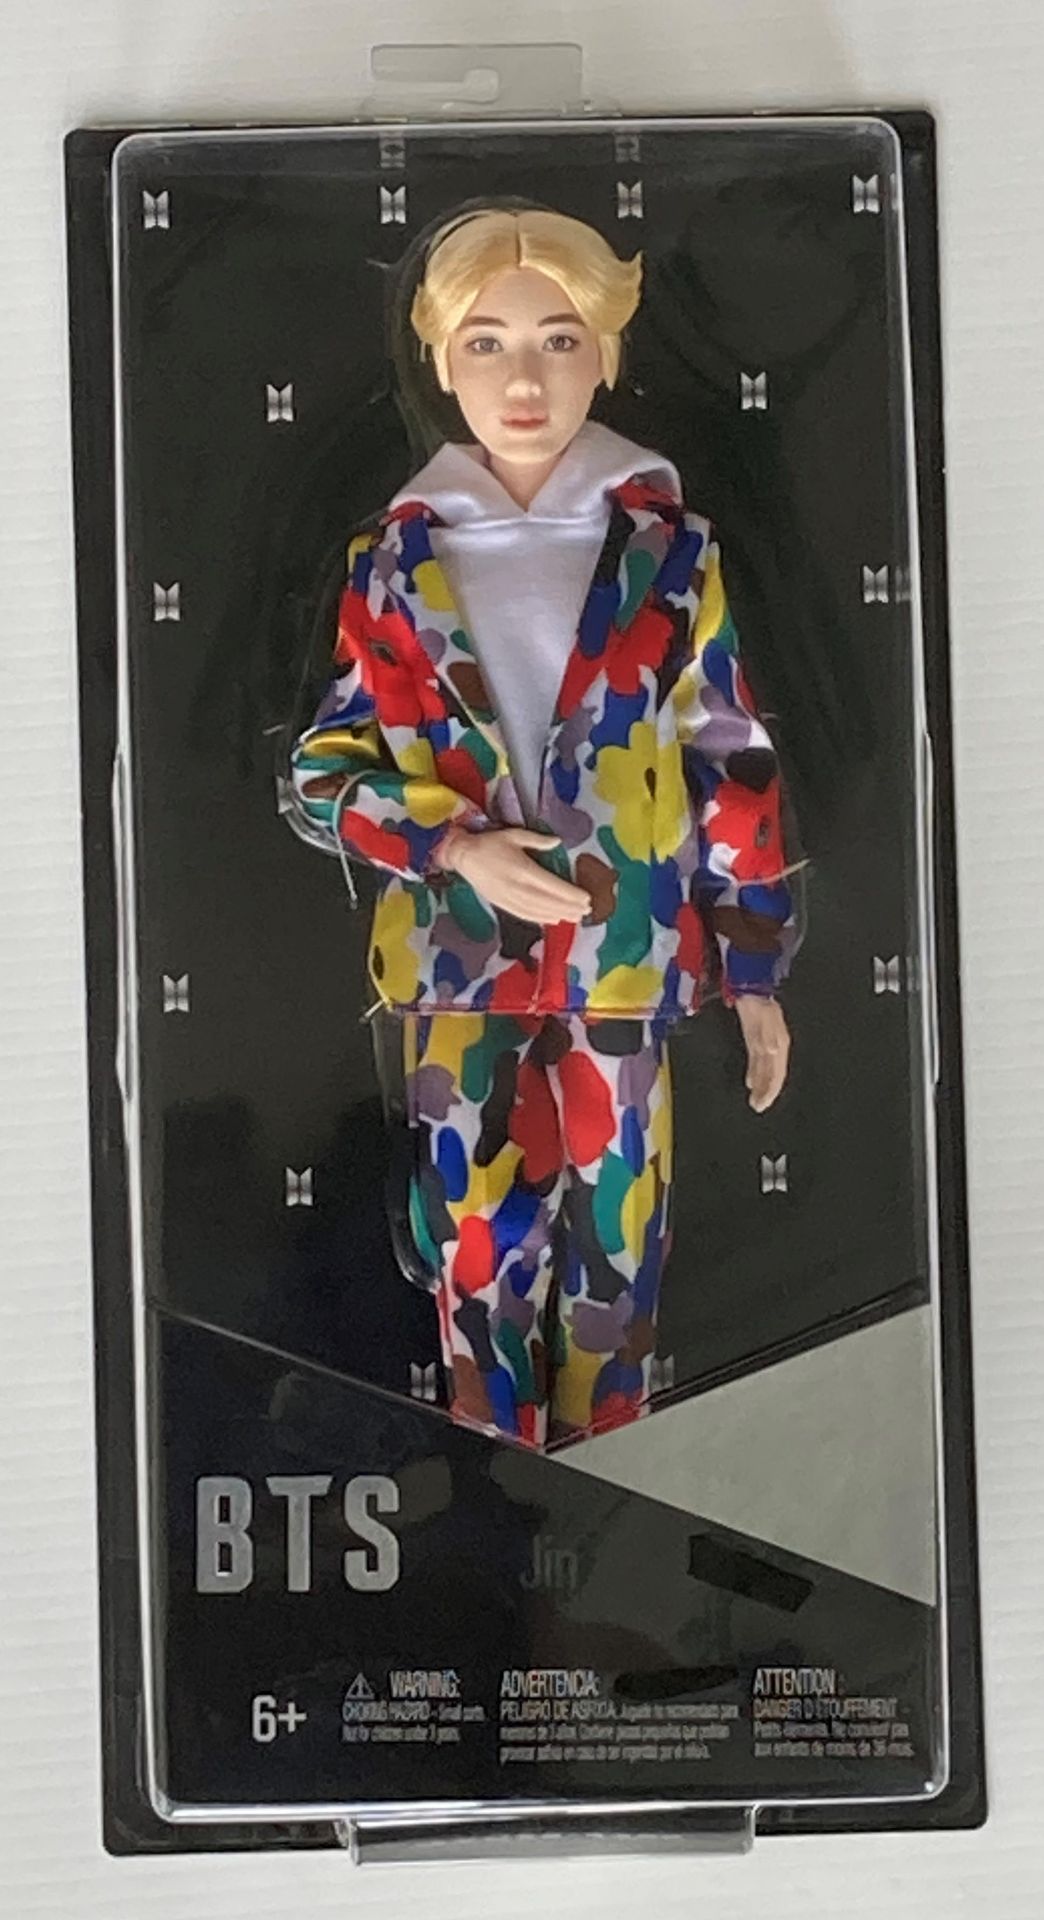 20 x Mattel BTS: Jin Idol dolls (4 x outer boxes) (saleroom location: container 3)